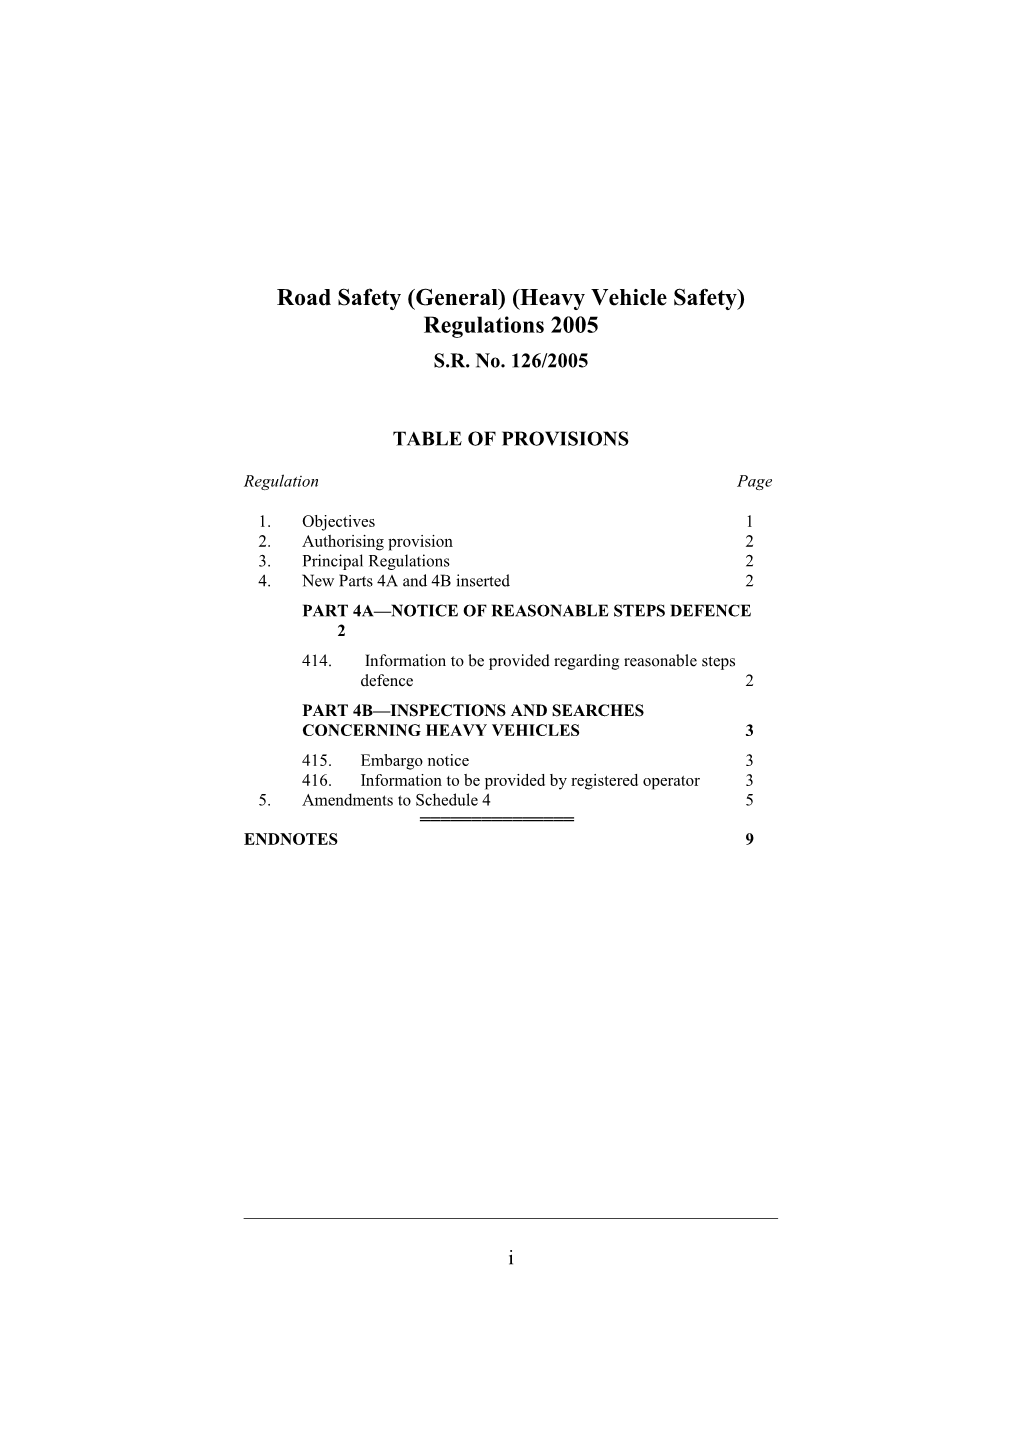 Road Safety (General) (Heavy Vehicle Safety) Regulations 2005